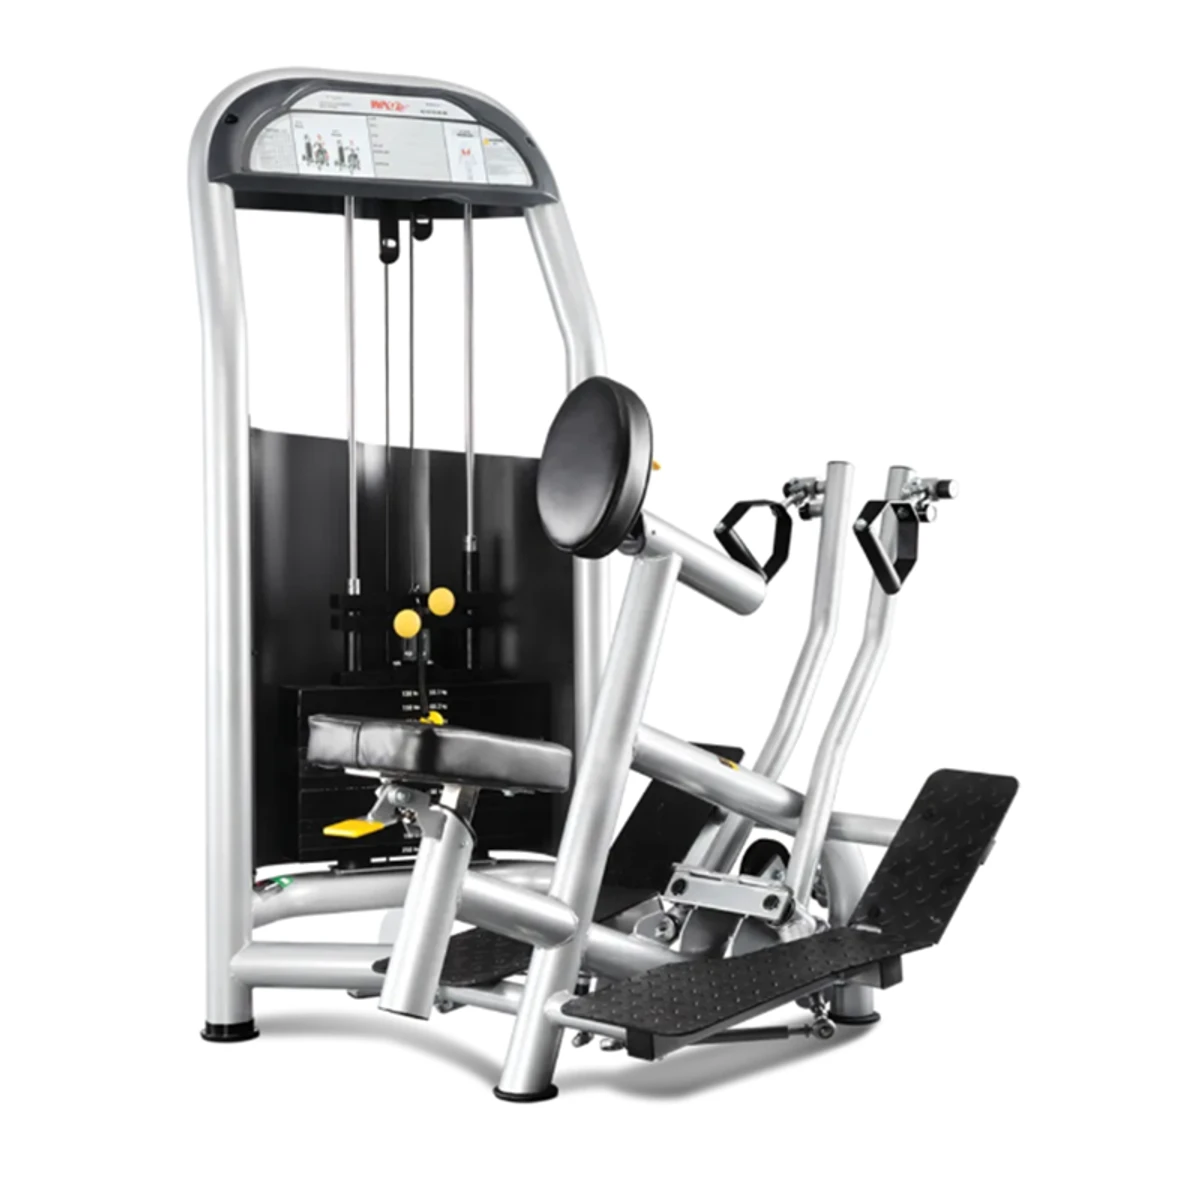 WNQ F1-5036 Strength Machine Pectoral Fly Rear Deltoid Exercise equipment Breast Expansion For Gym Use